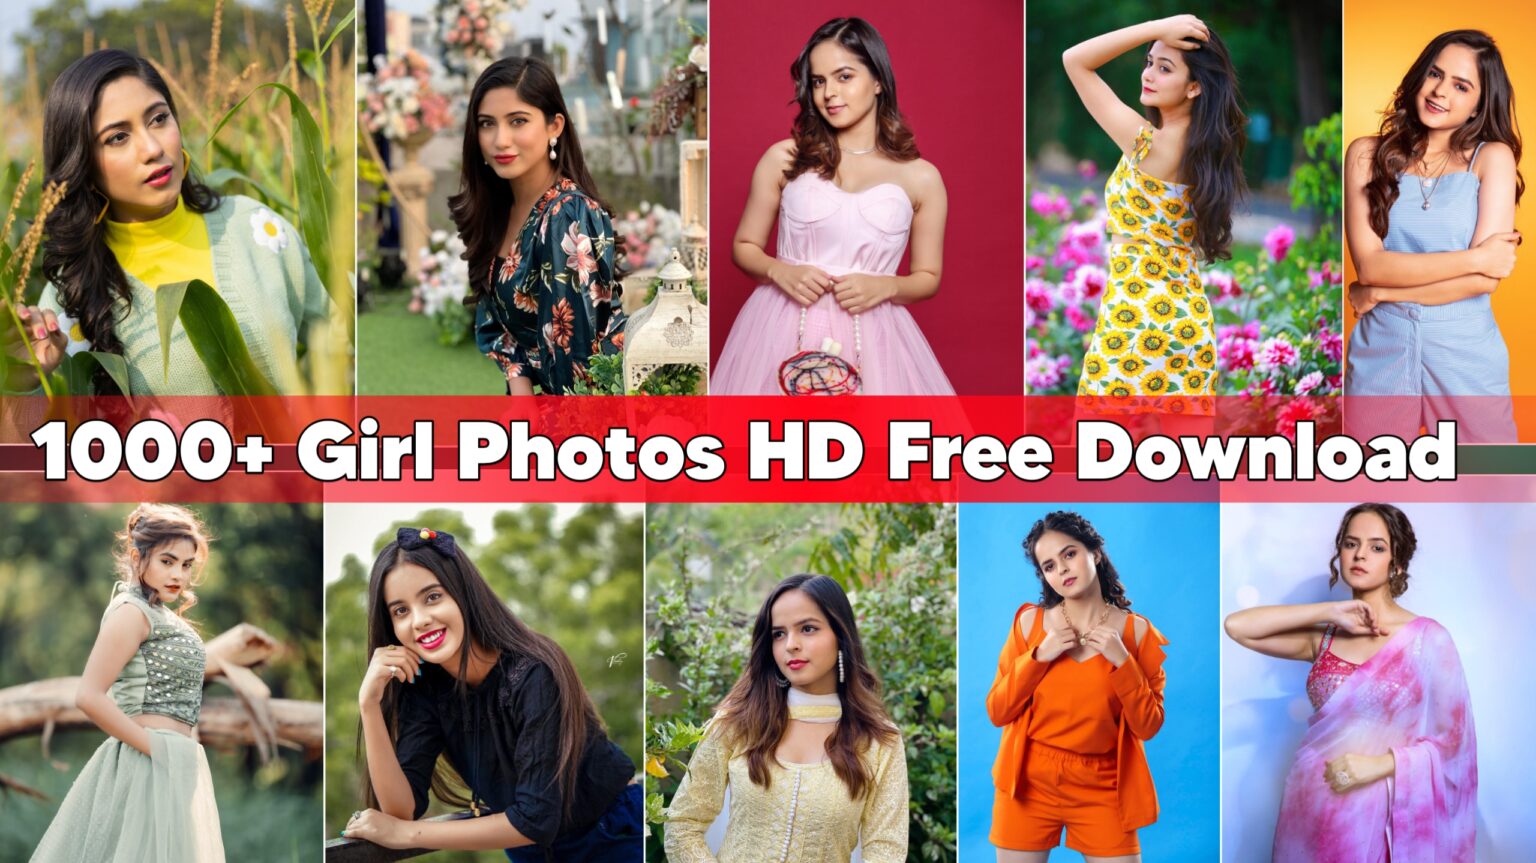 1000+ Girl Photos HD Free Download Stock